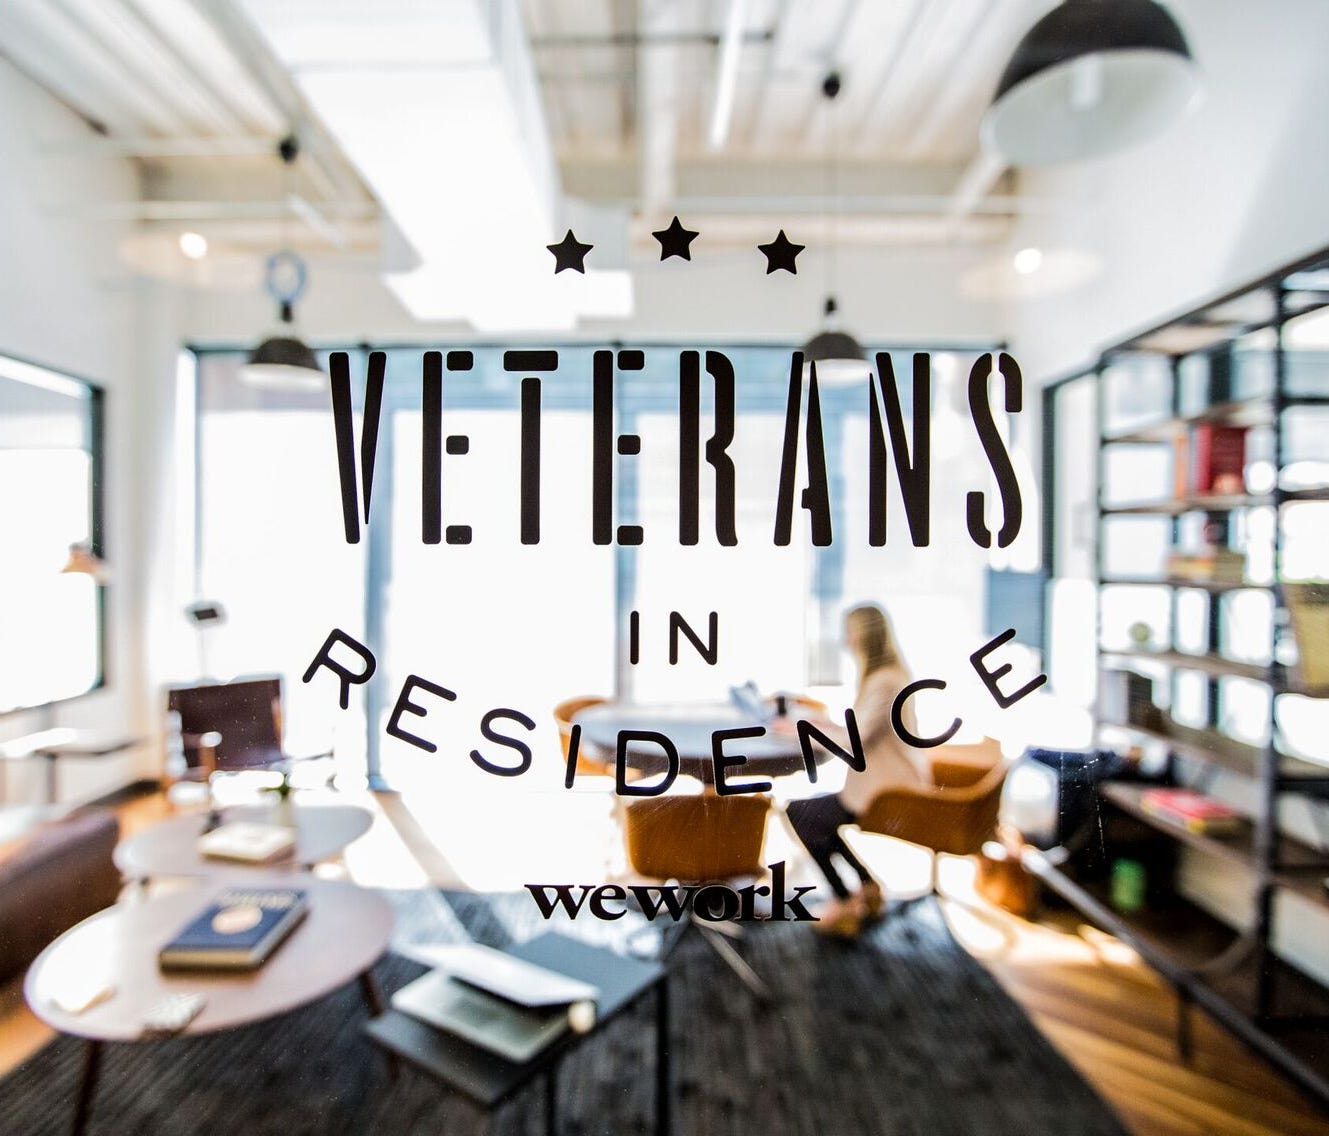 WeWork is launching a Veterans in Residence program in 10 cities aimed at helping service vets start new companies.